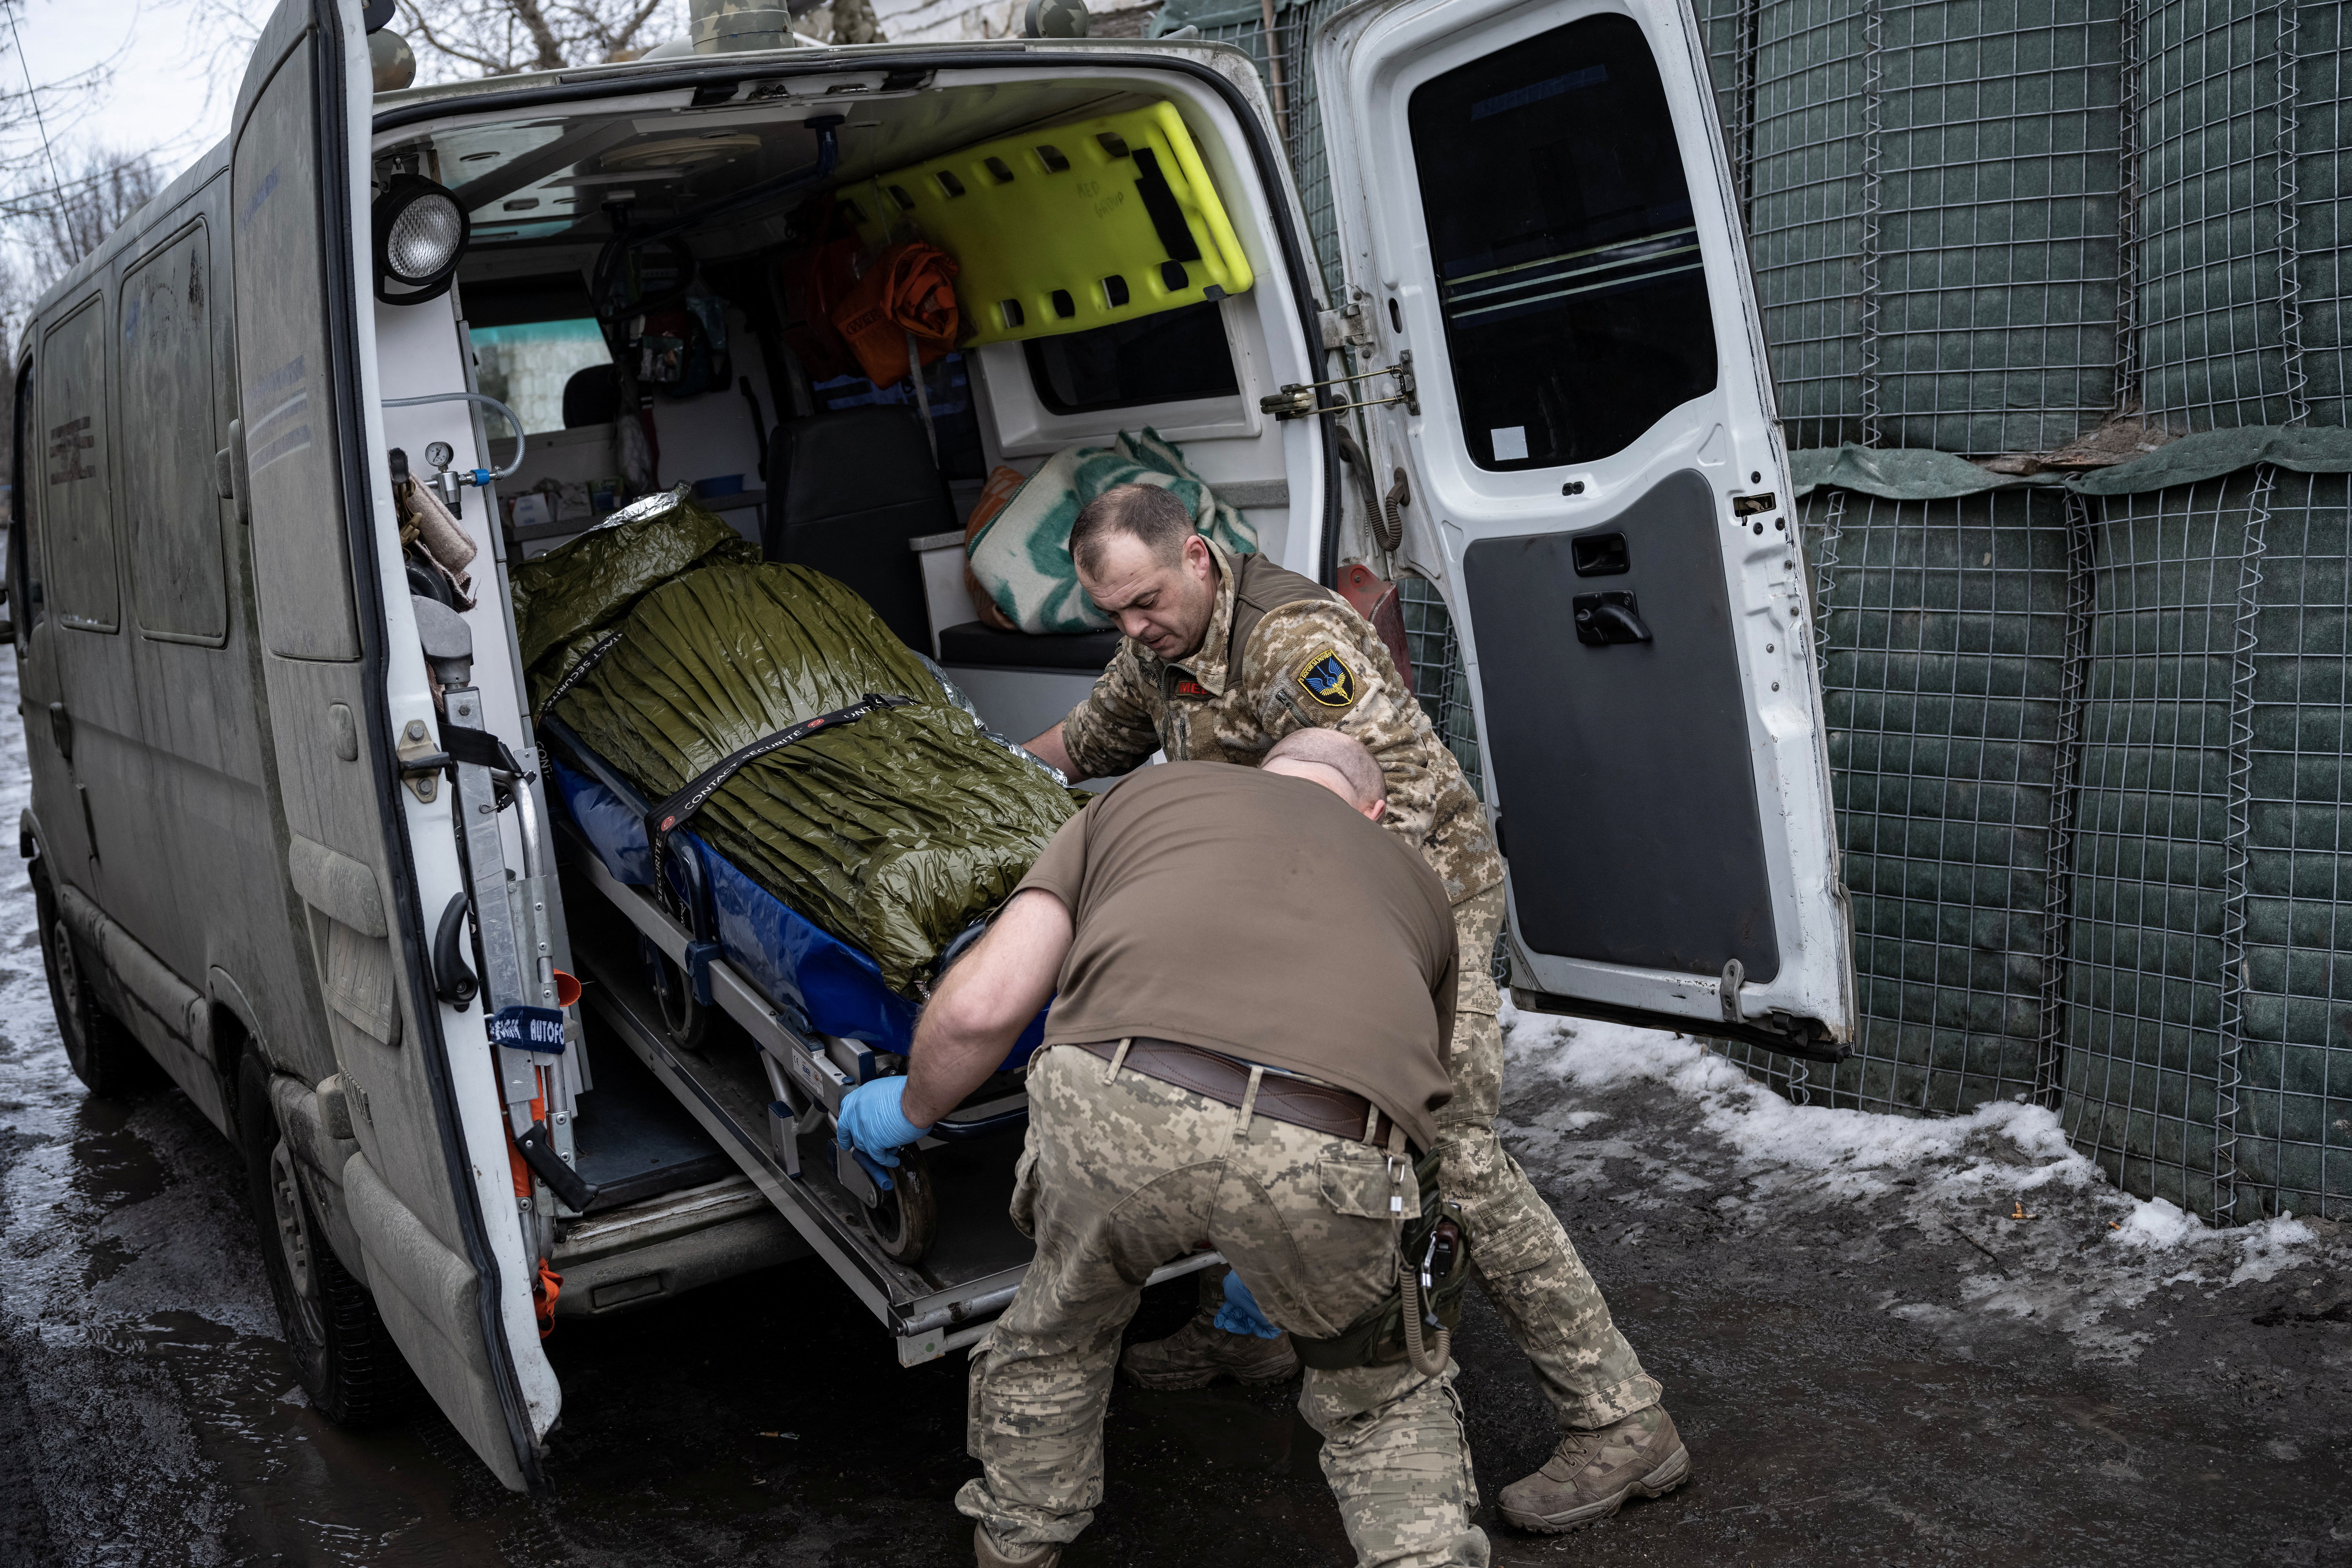 Medics place a wounded soldier in an emergency vehicle to transport him to a hospital